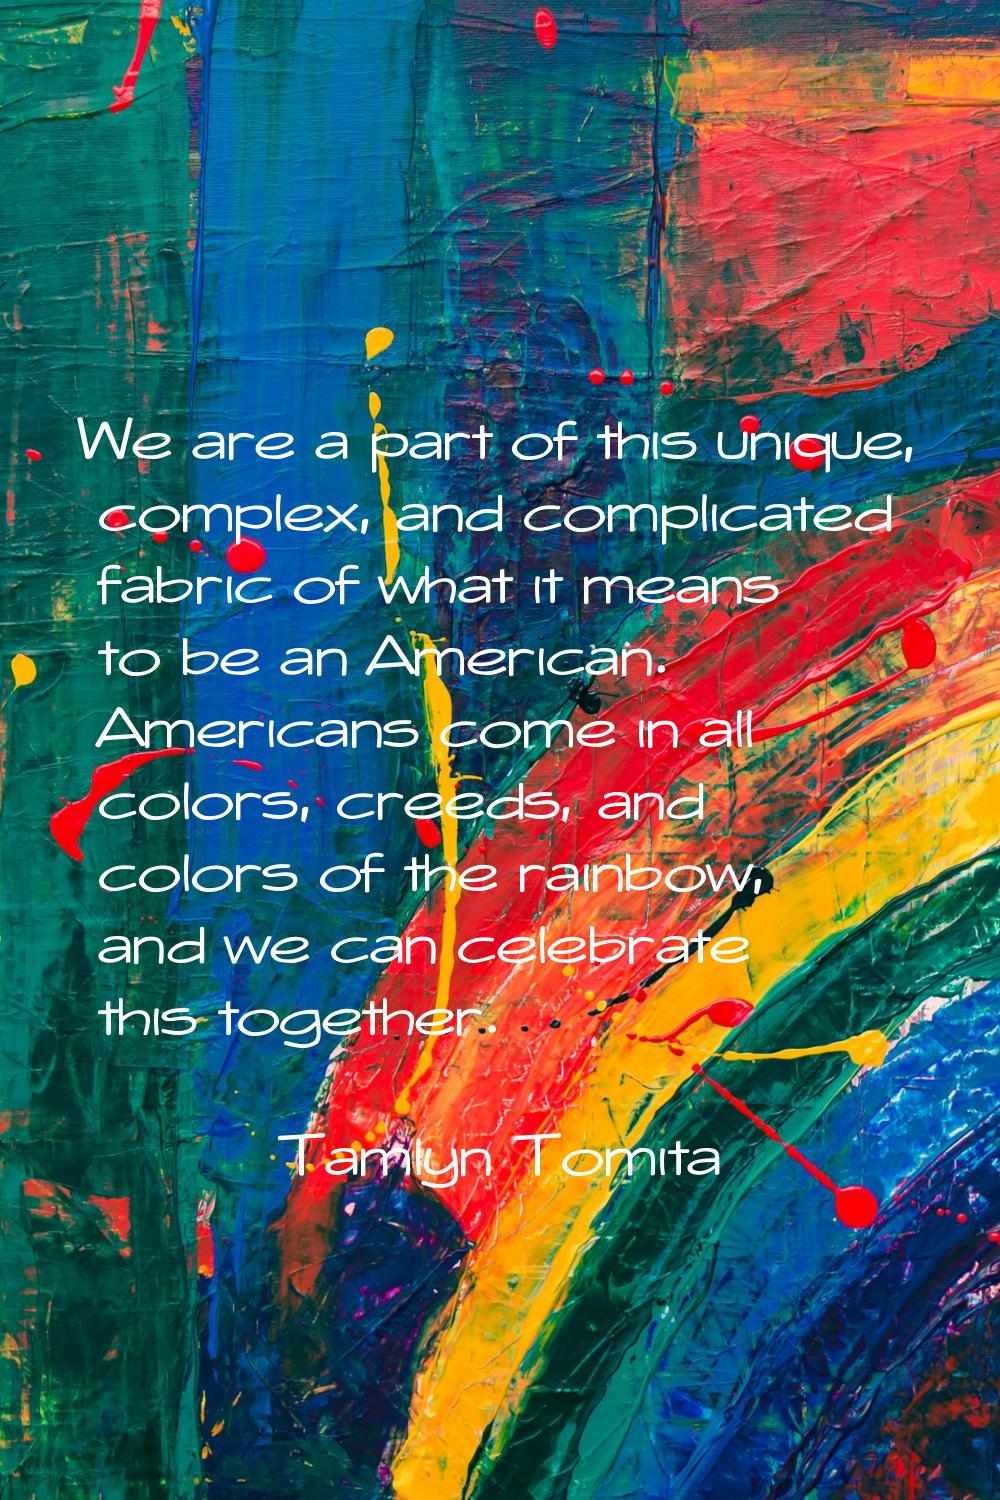 We are a part of this unique, complex, and complicated fabric of what it means to be an American. A